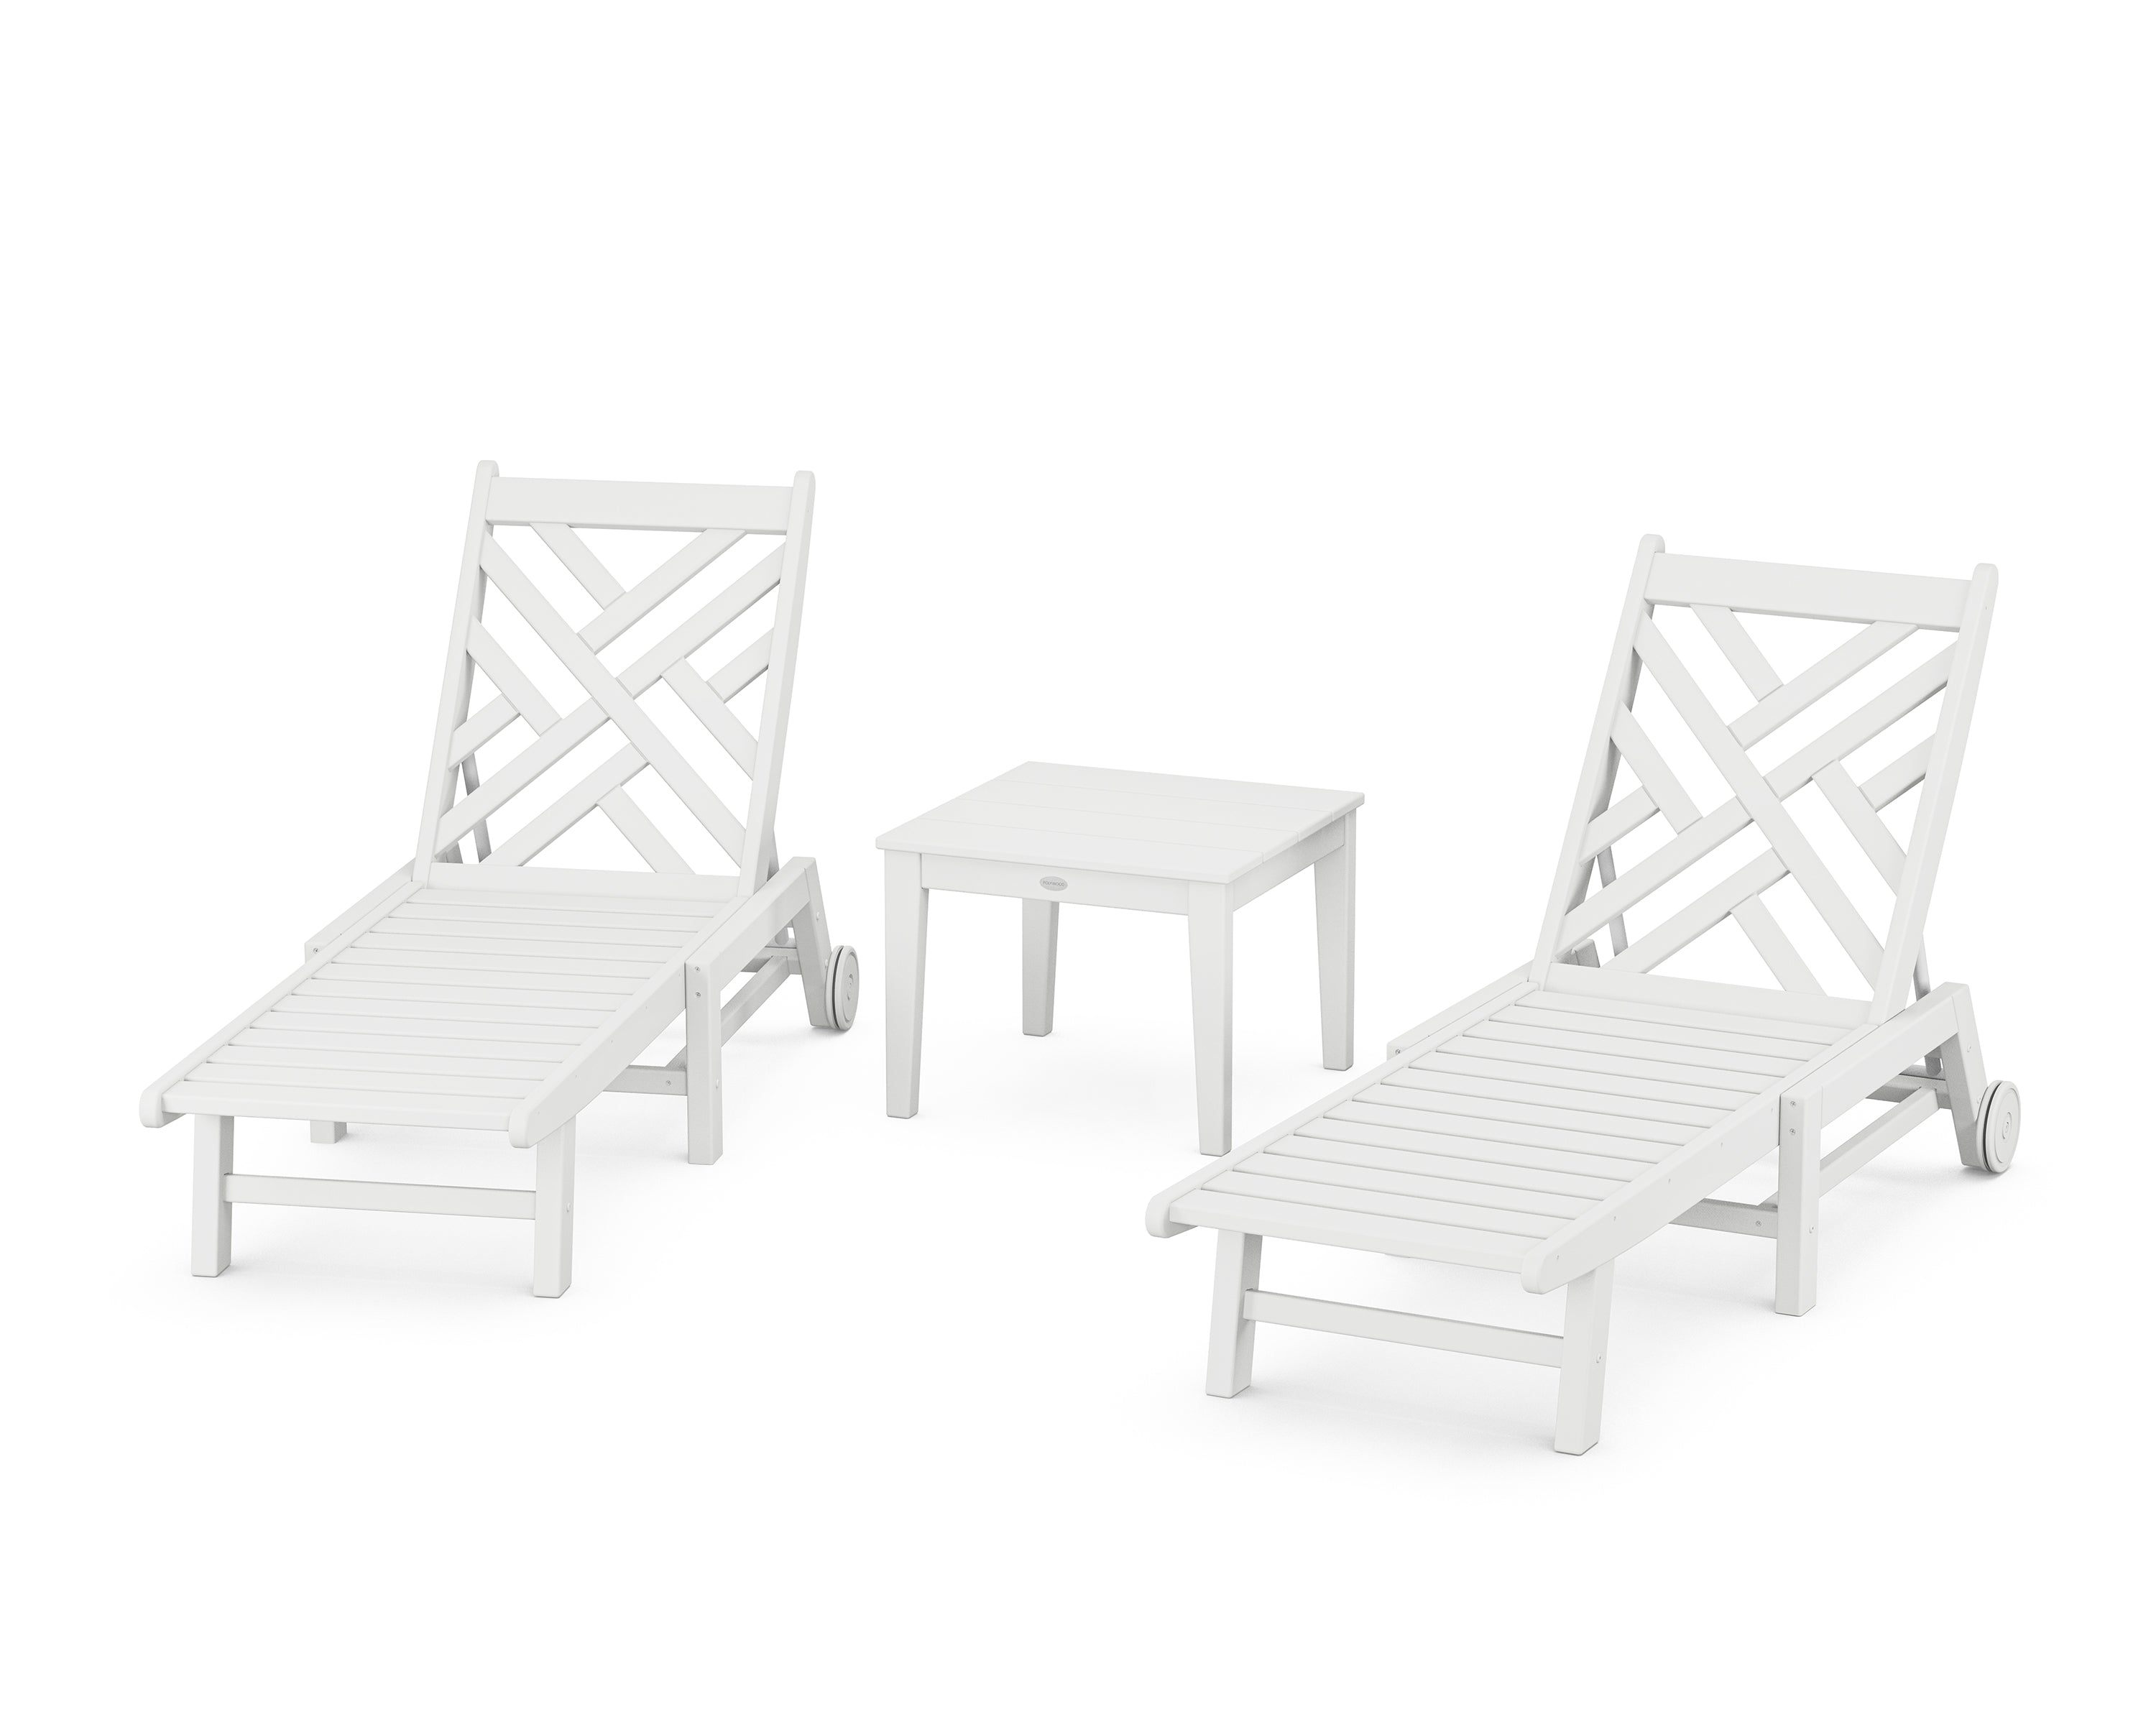 POLYWOOD Chippendale 3-Piece Chaise Set with Wheels in White